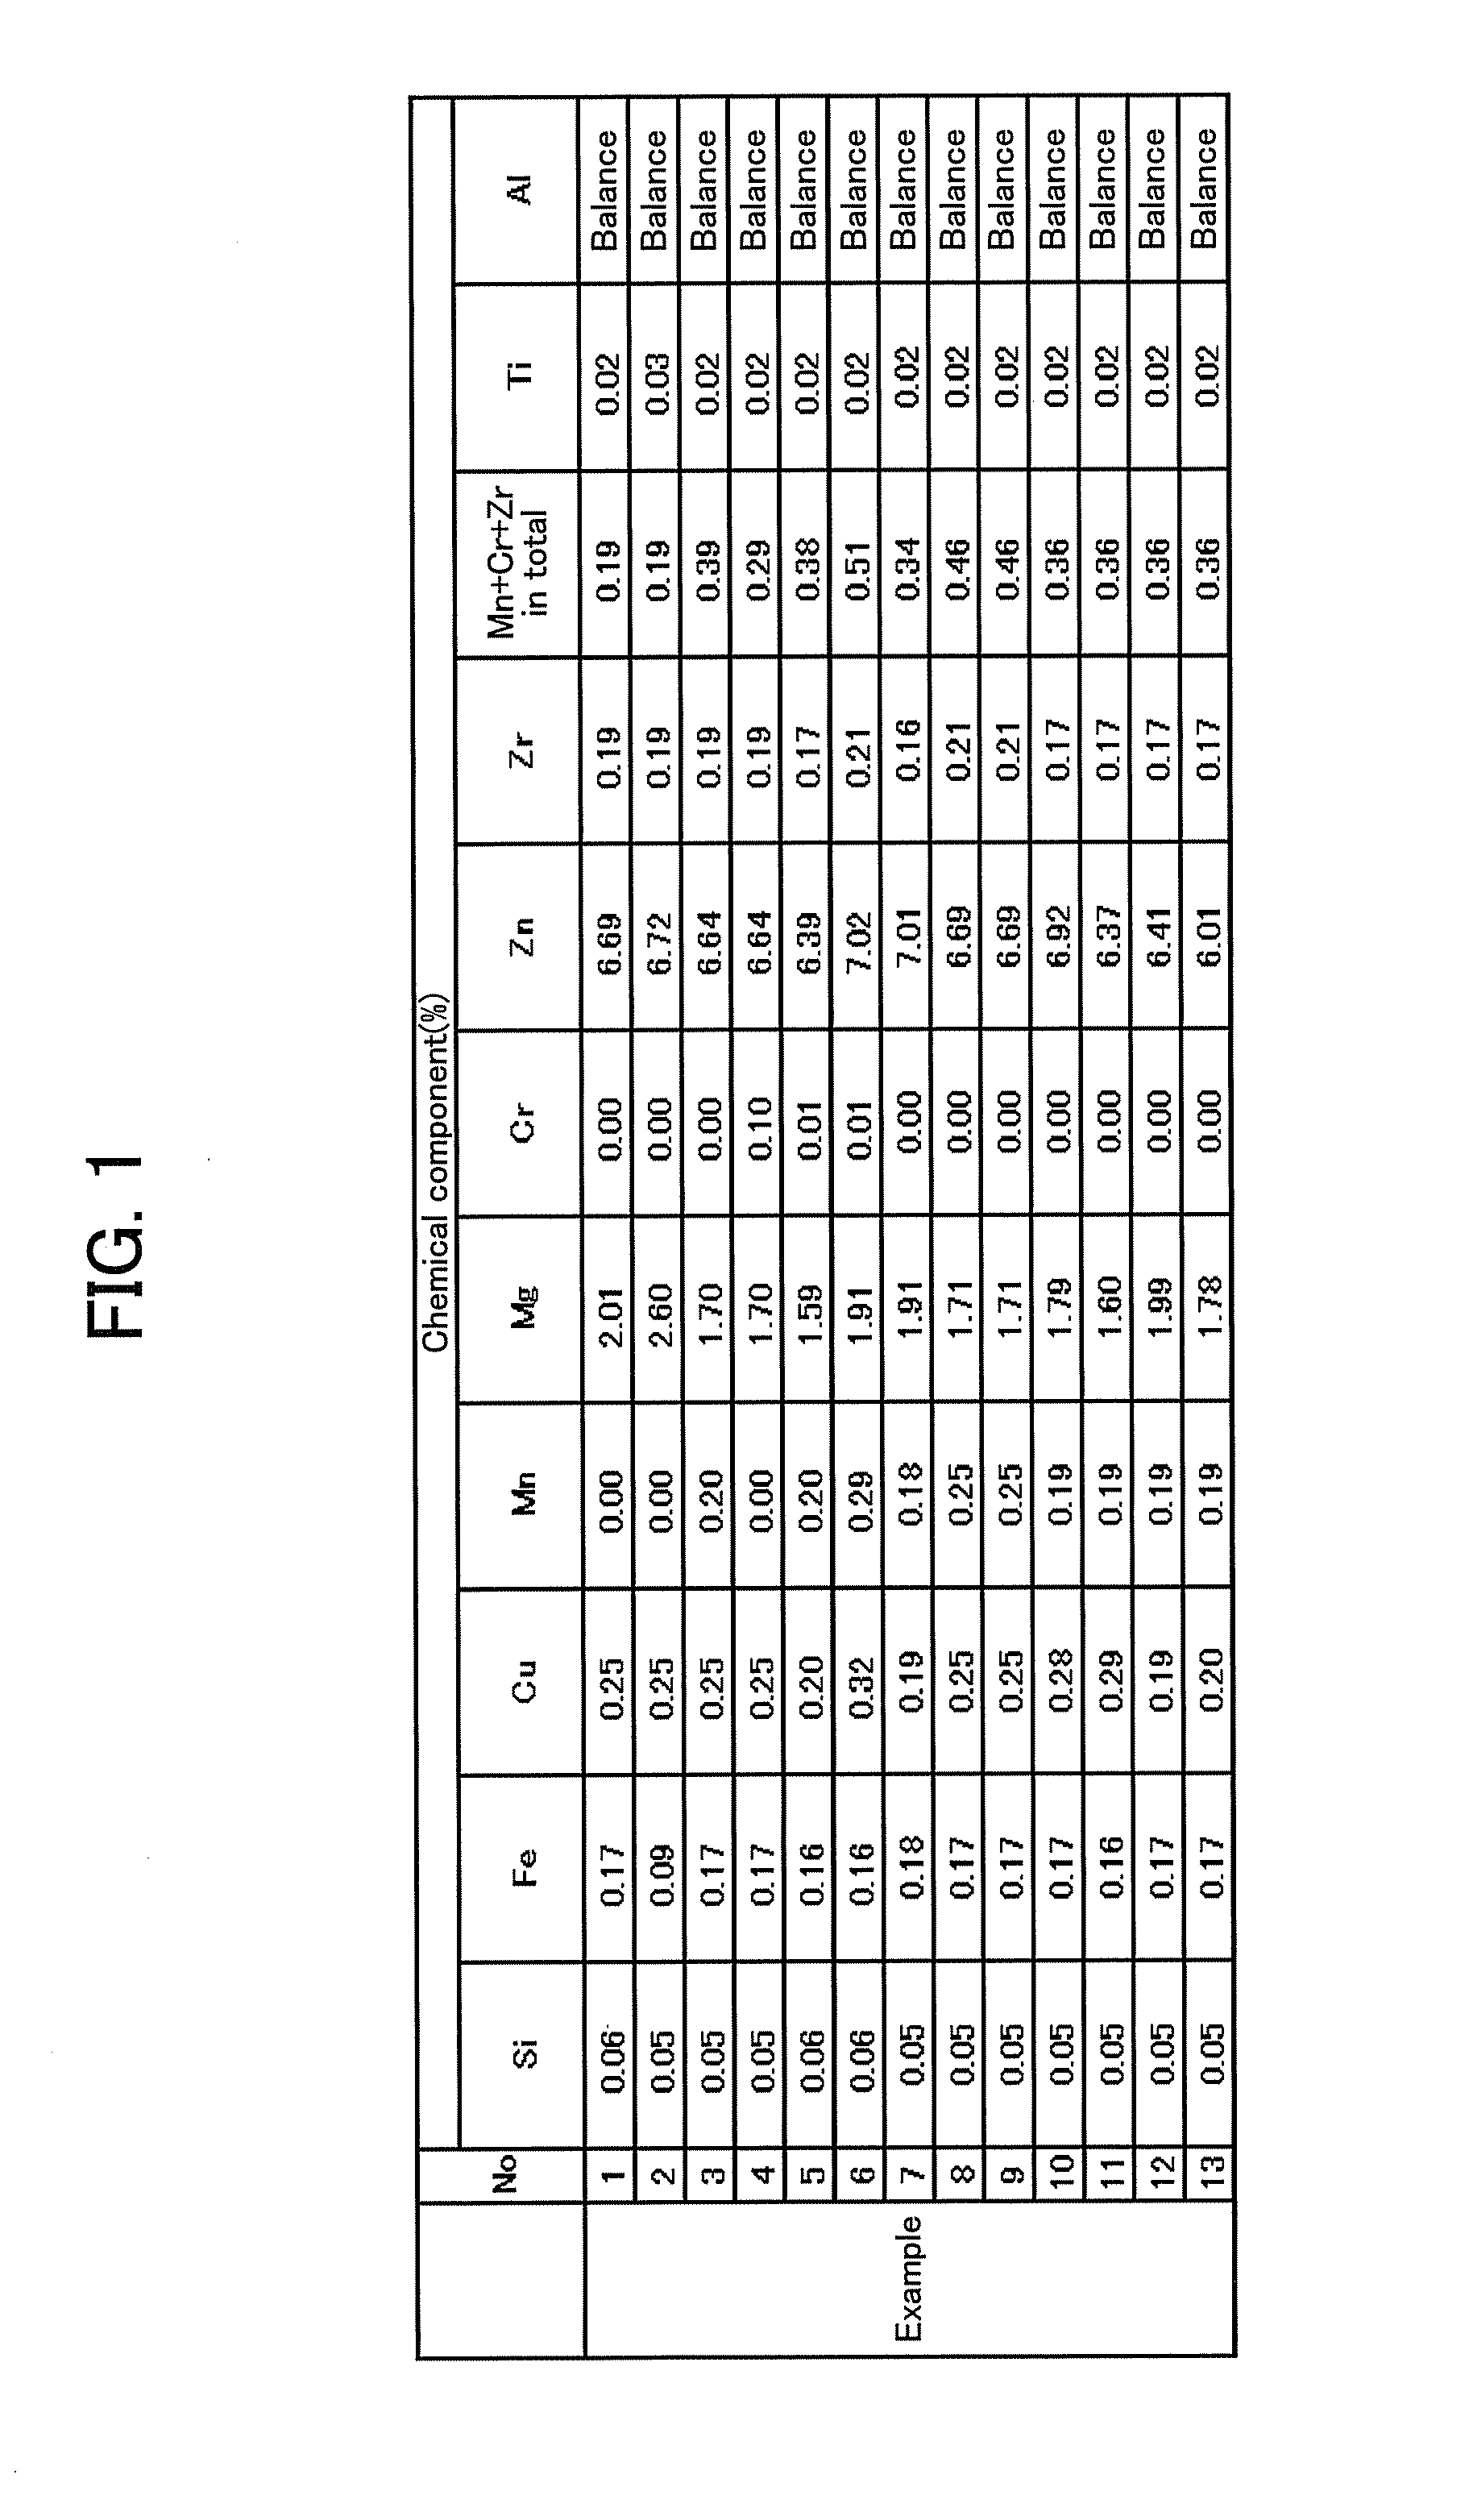 Aluminum alloy and method of manufacturing extrusion using same